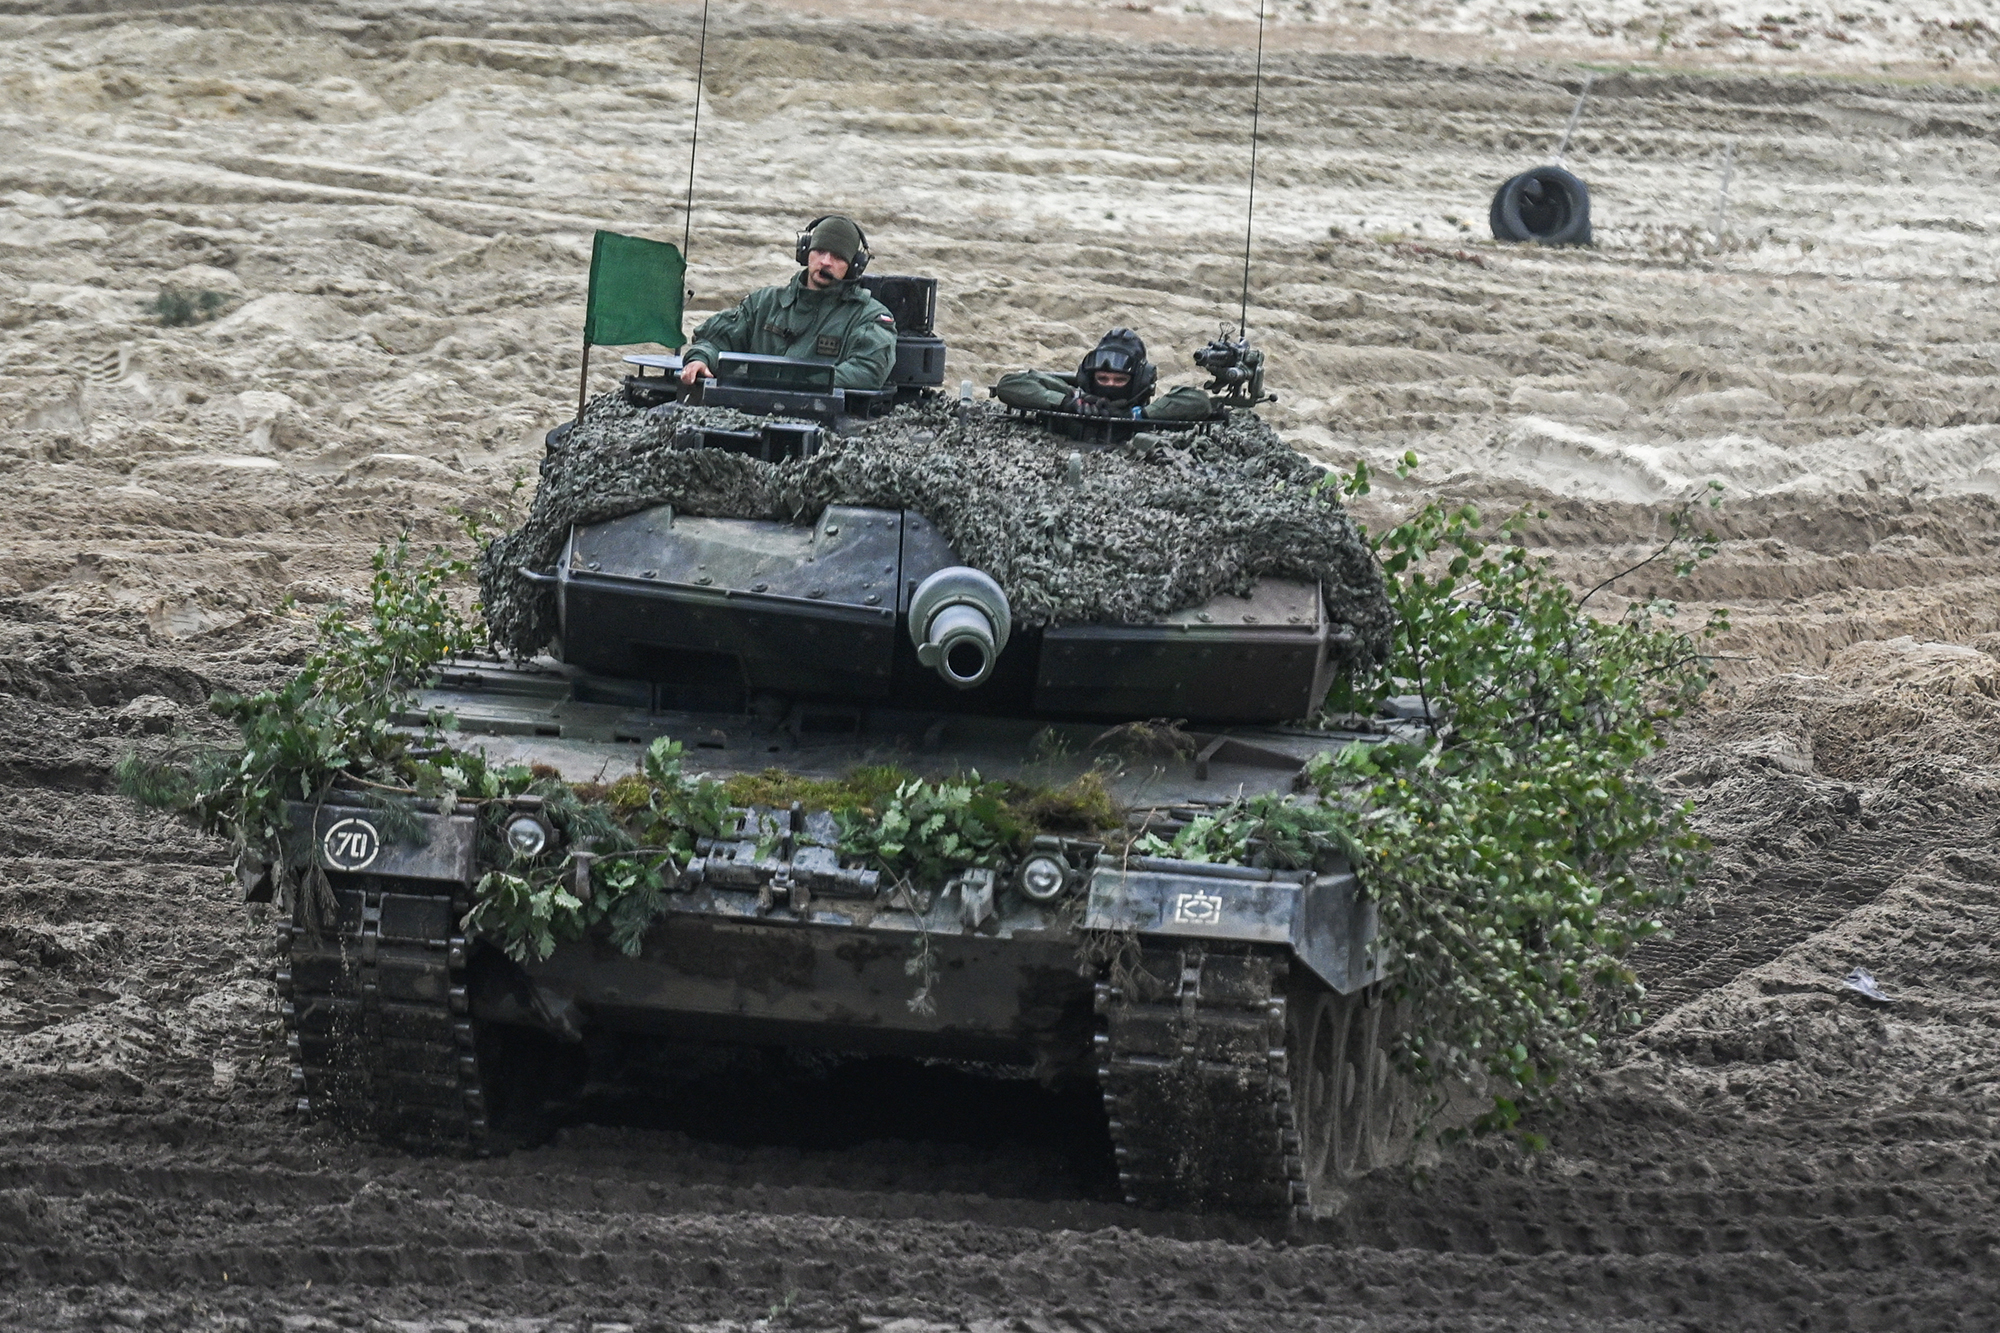 Polish troops drive a Leopard tank during a live-fire demonstration of the Bear 22 military exercise at the Nowa Deba training range in Nowa Deba, Poland, September 21. 